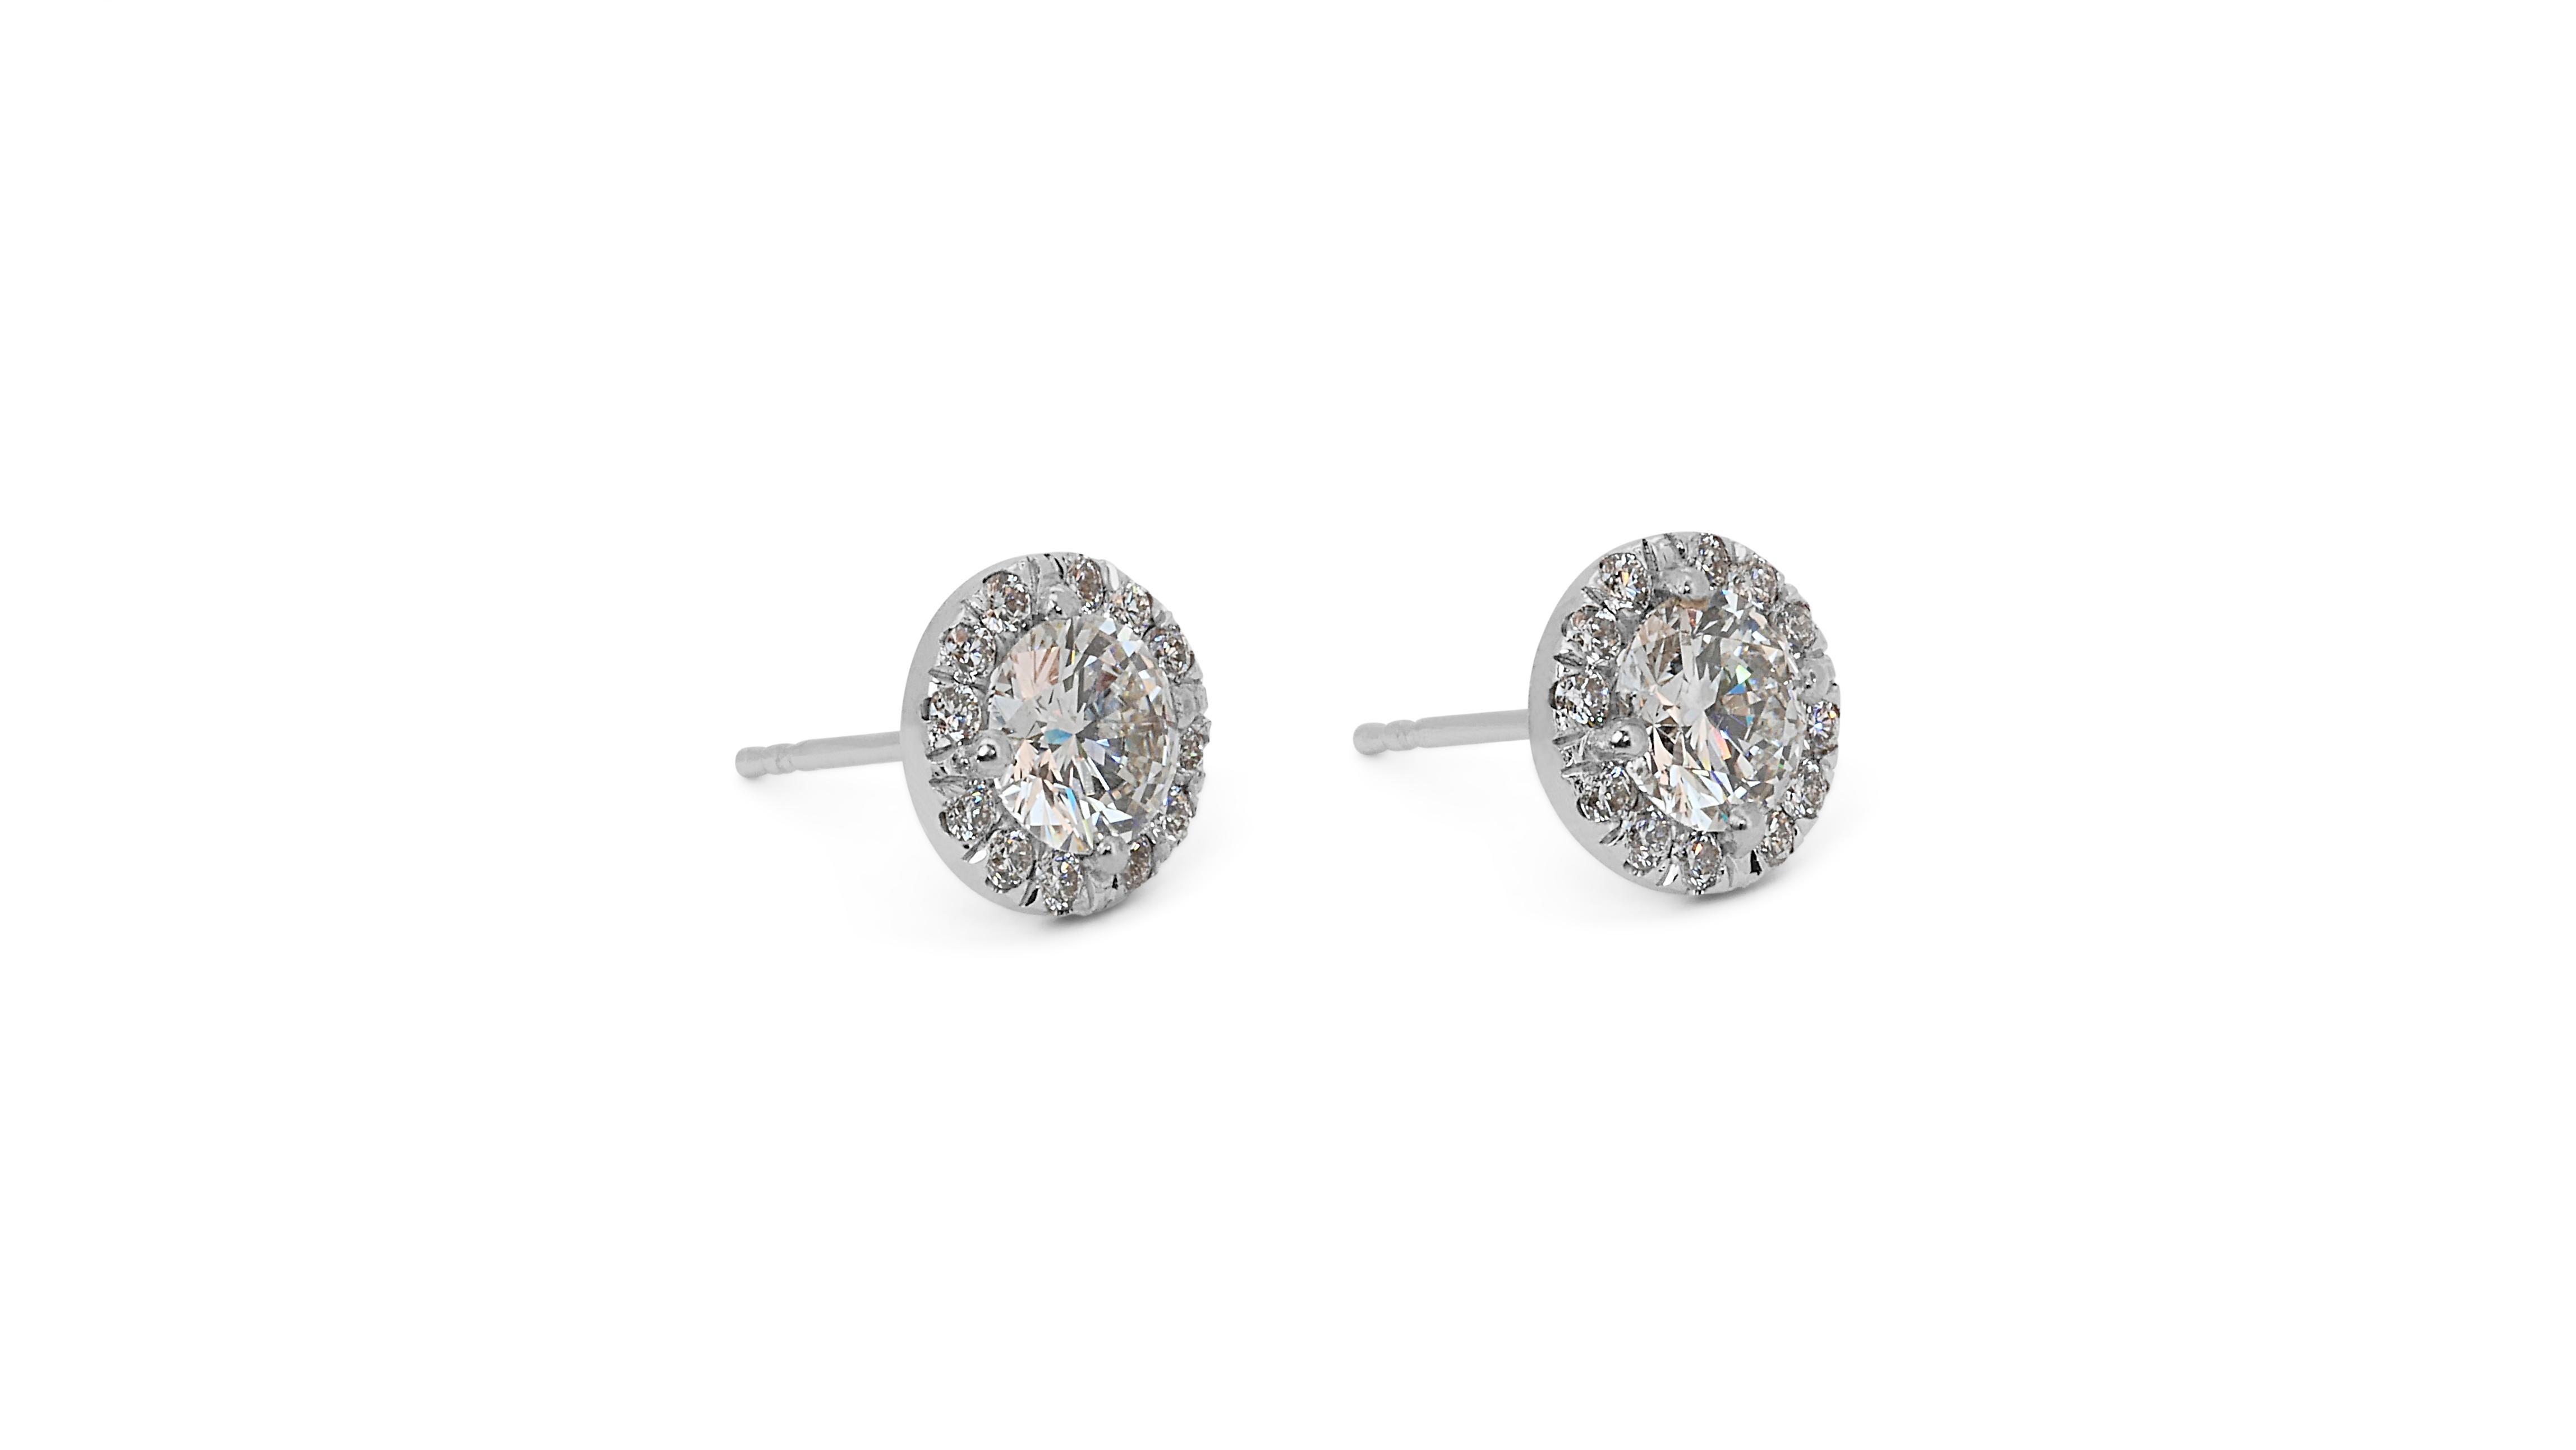 Lustrous 2.57ct Diamond Stud Earrings in 18k White Gold - GIA Certified For Sale 2